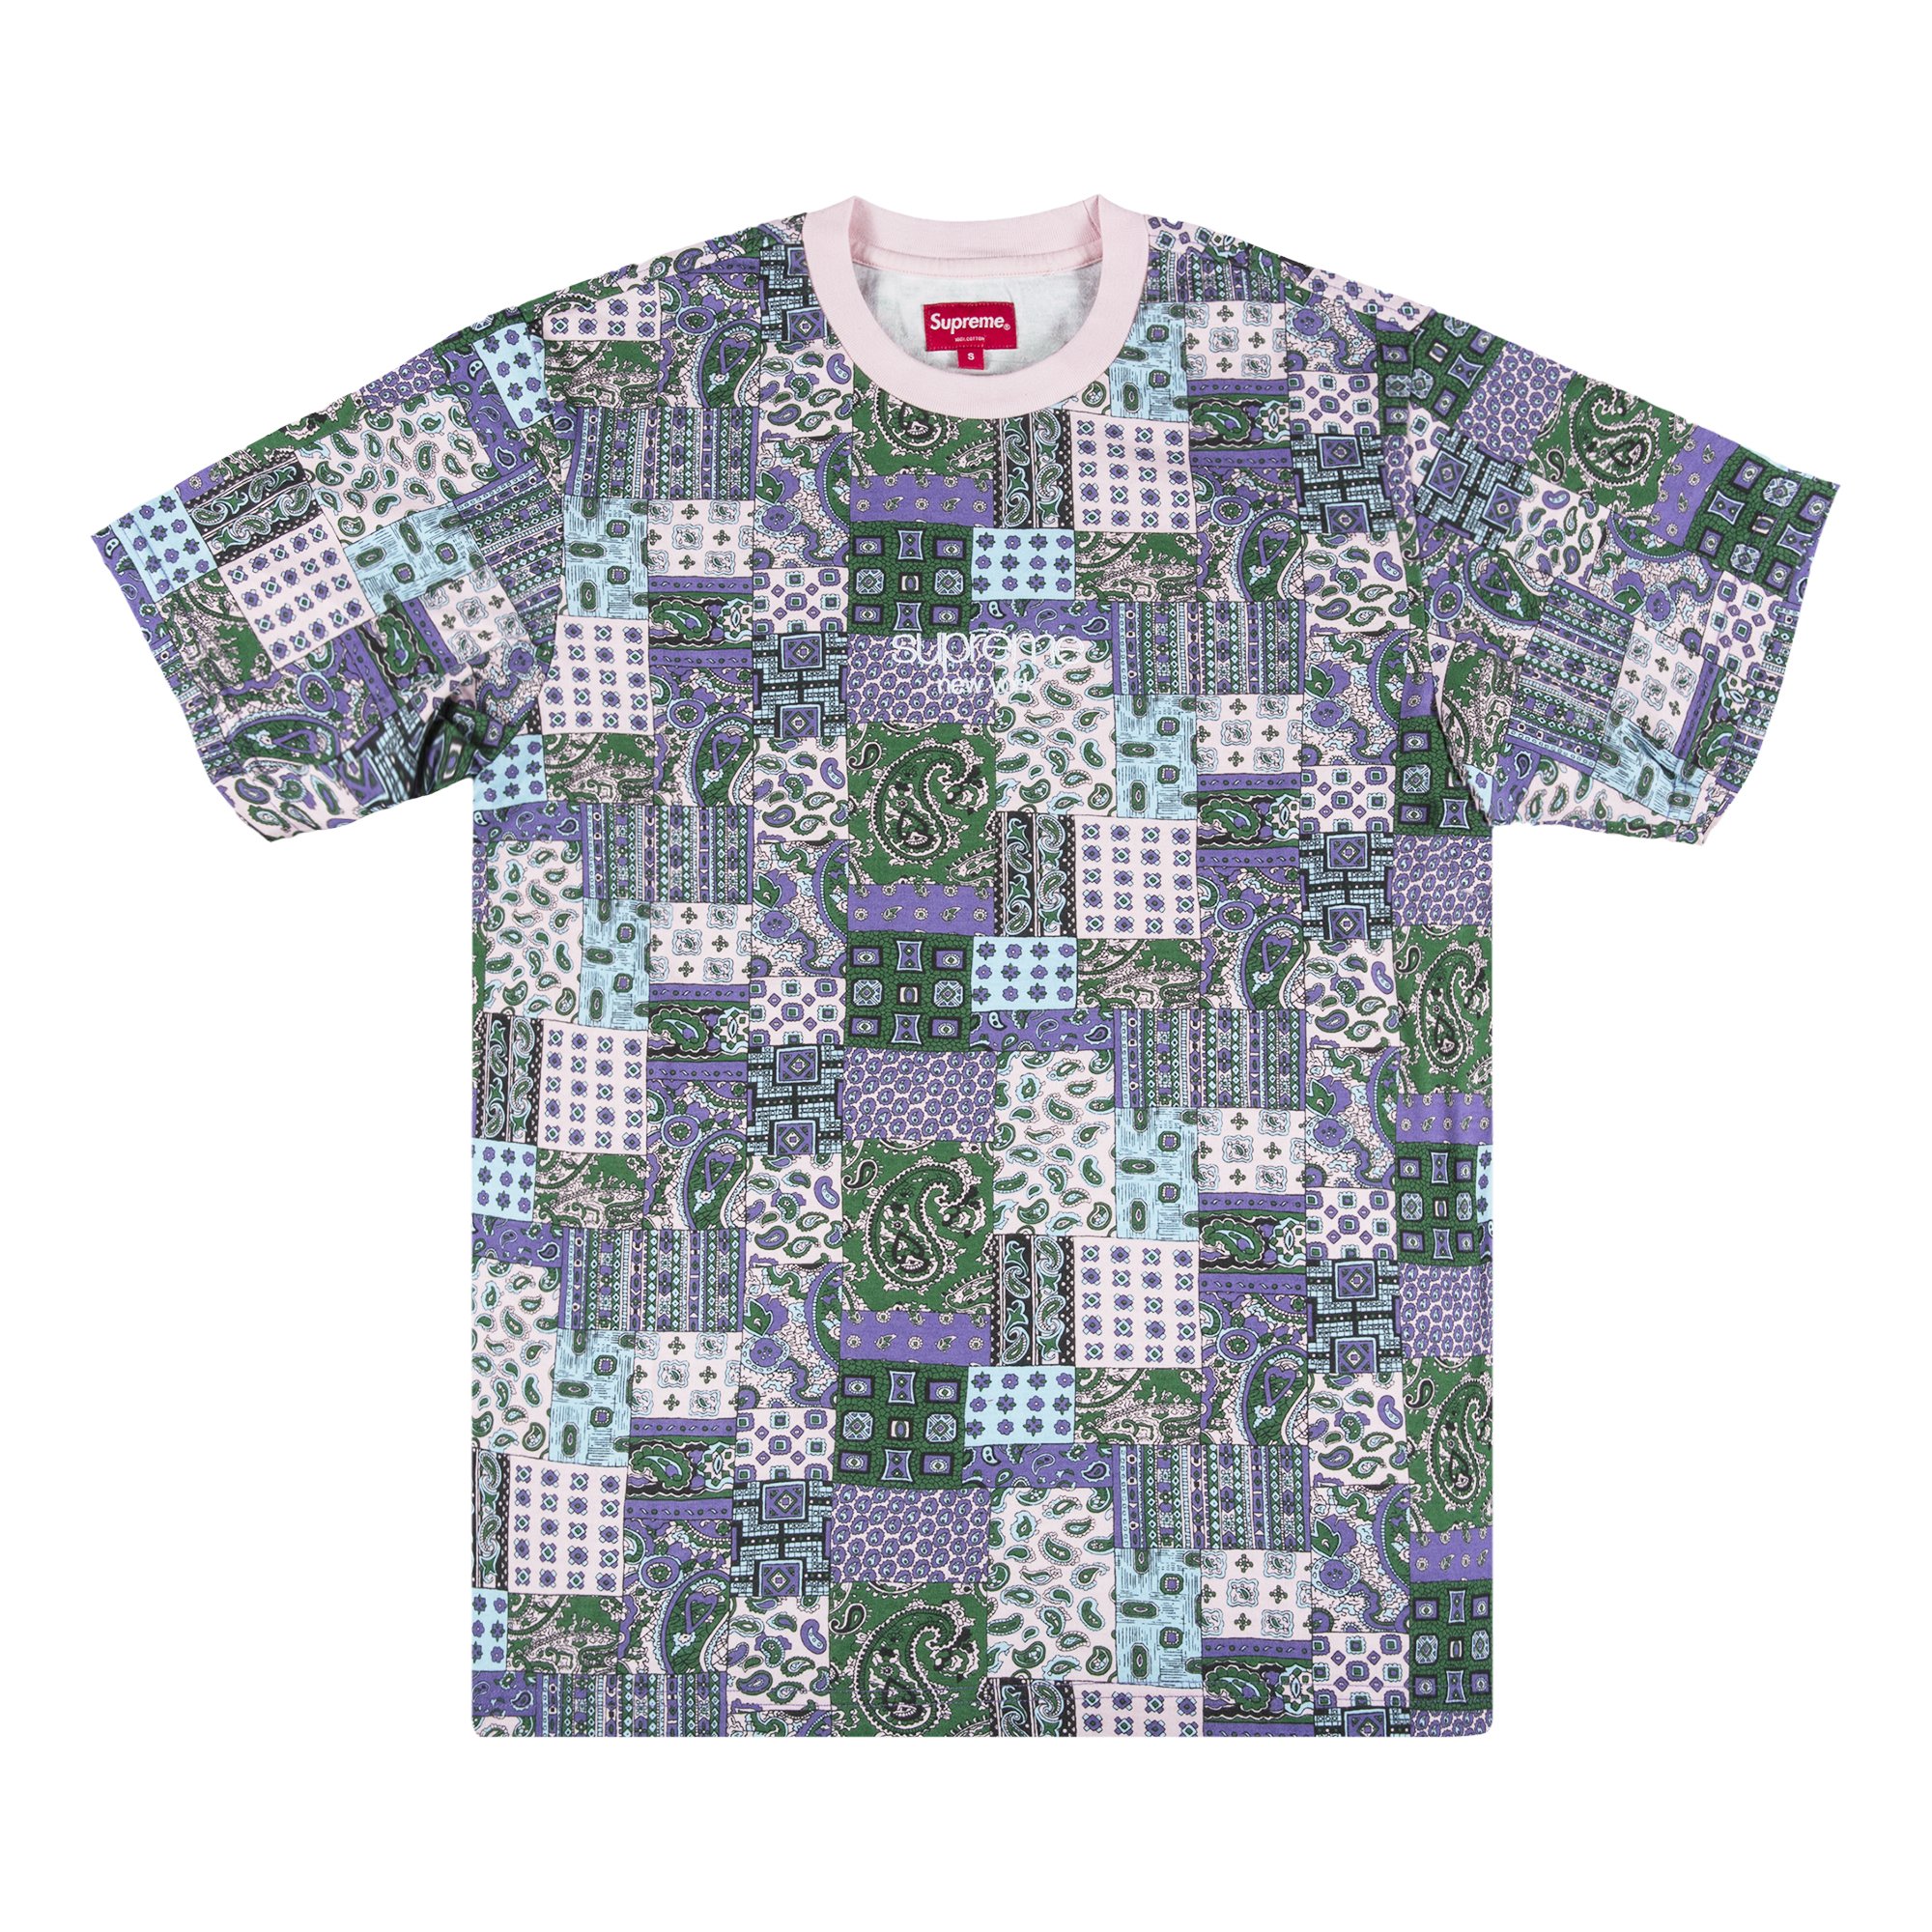 supreme patchwork paisley s/s top